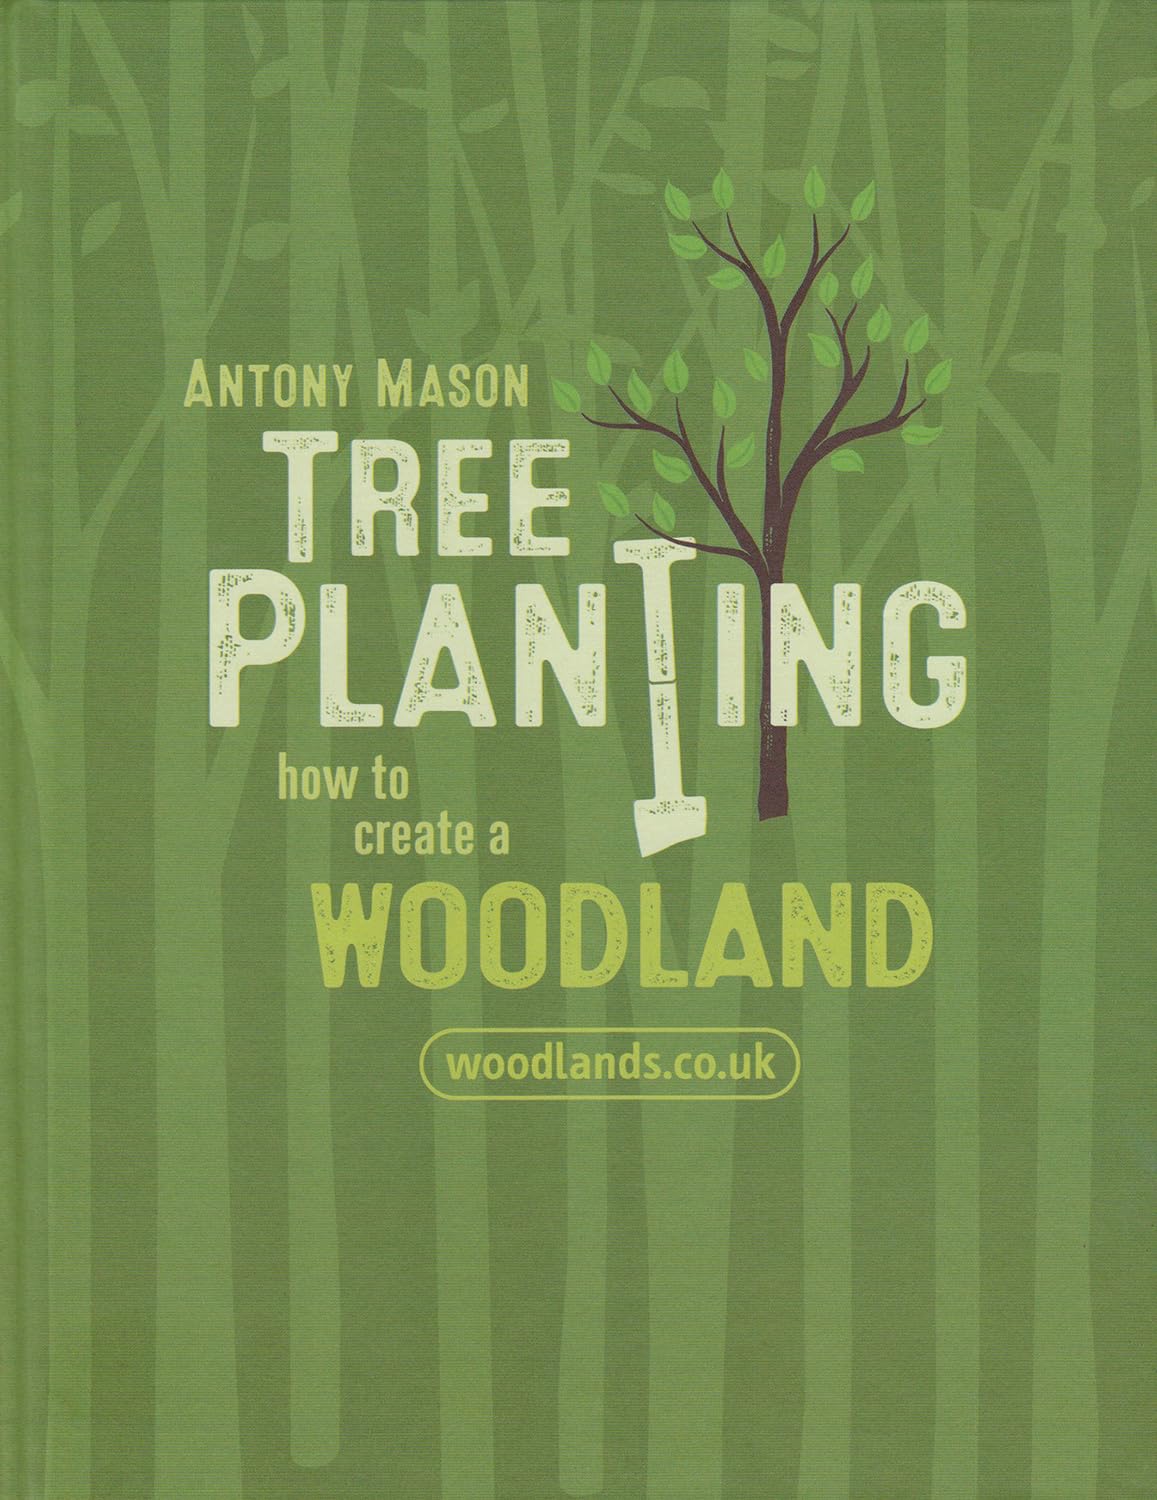 A picture of the cover of the book Tree Planting by Antony Mason